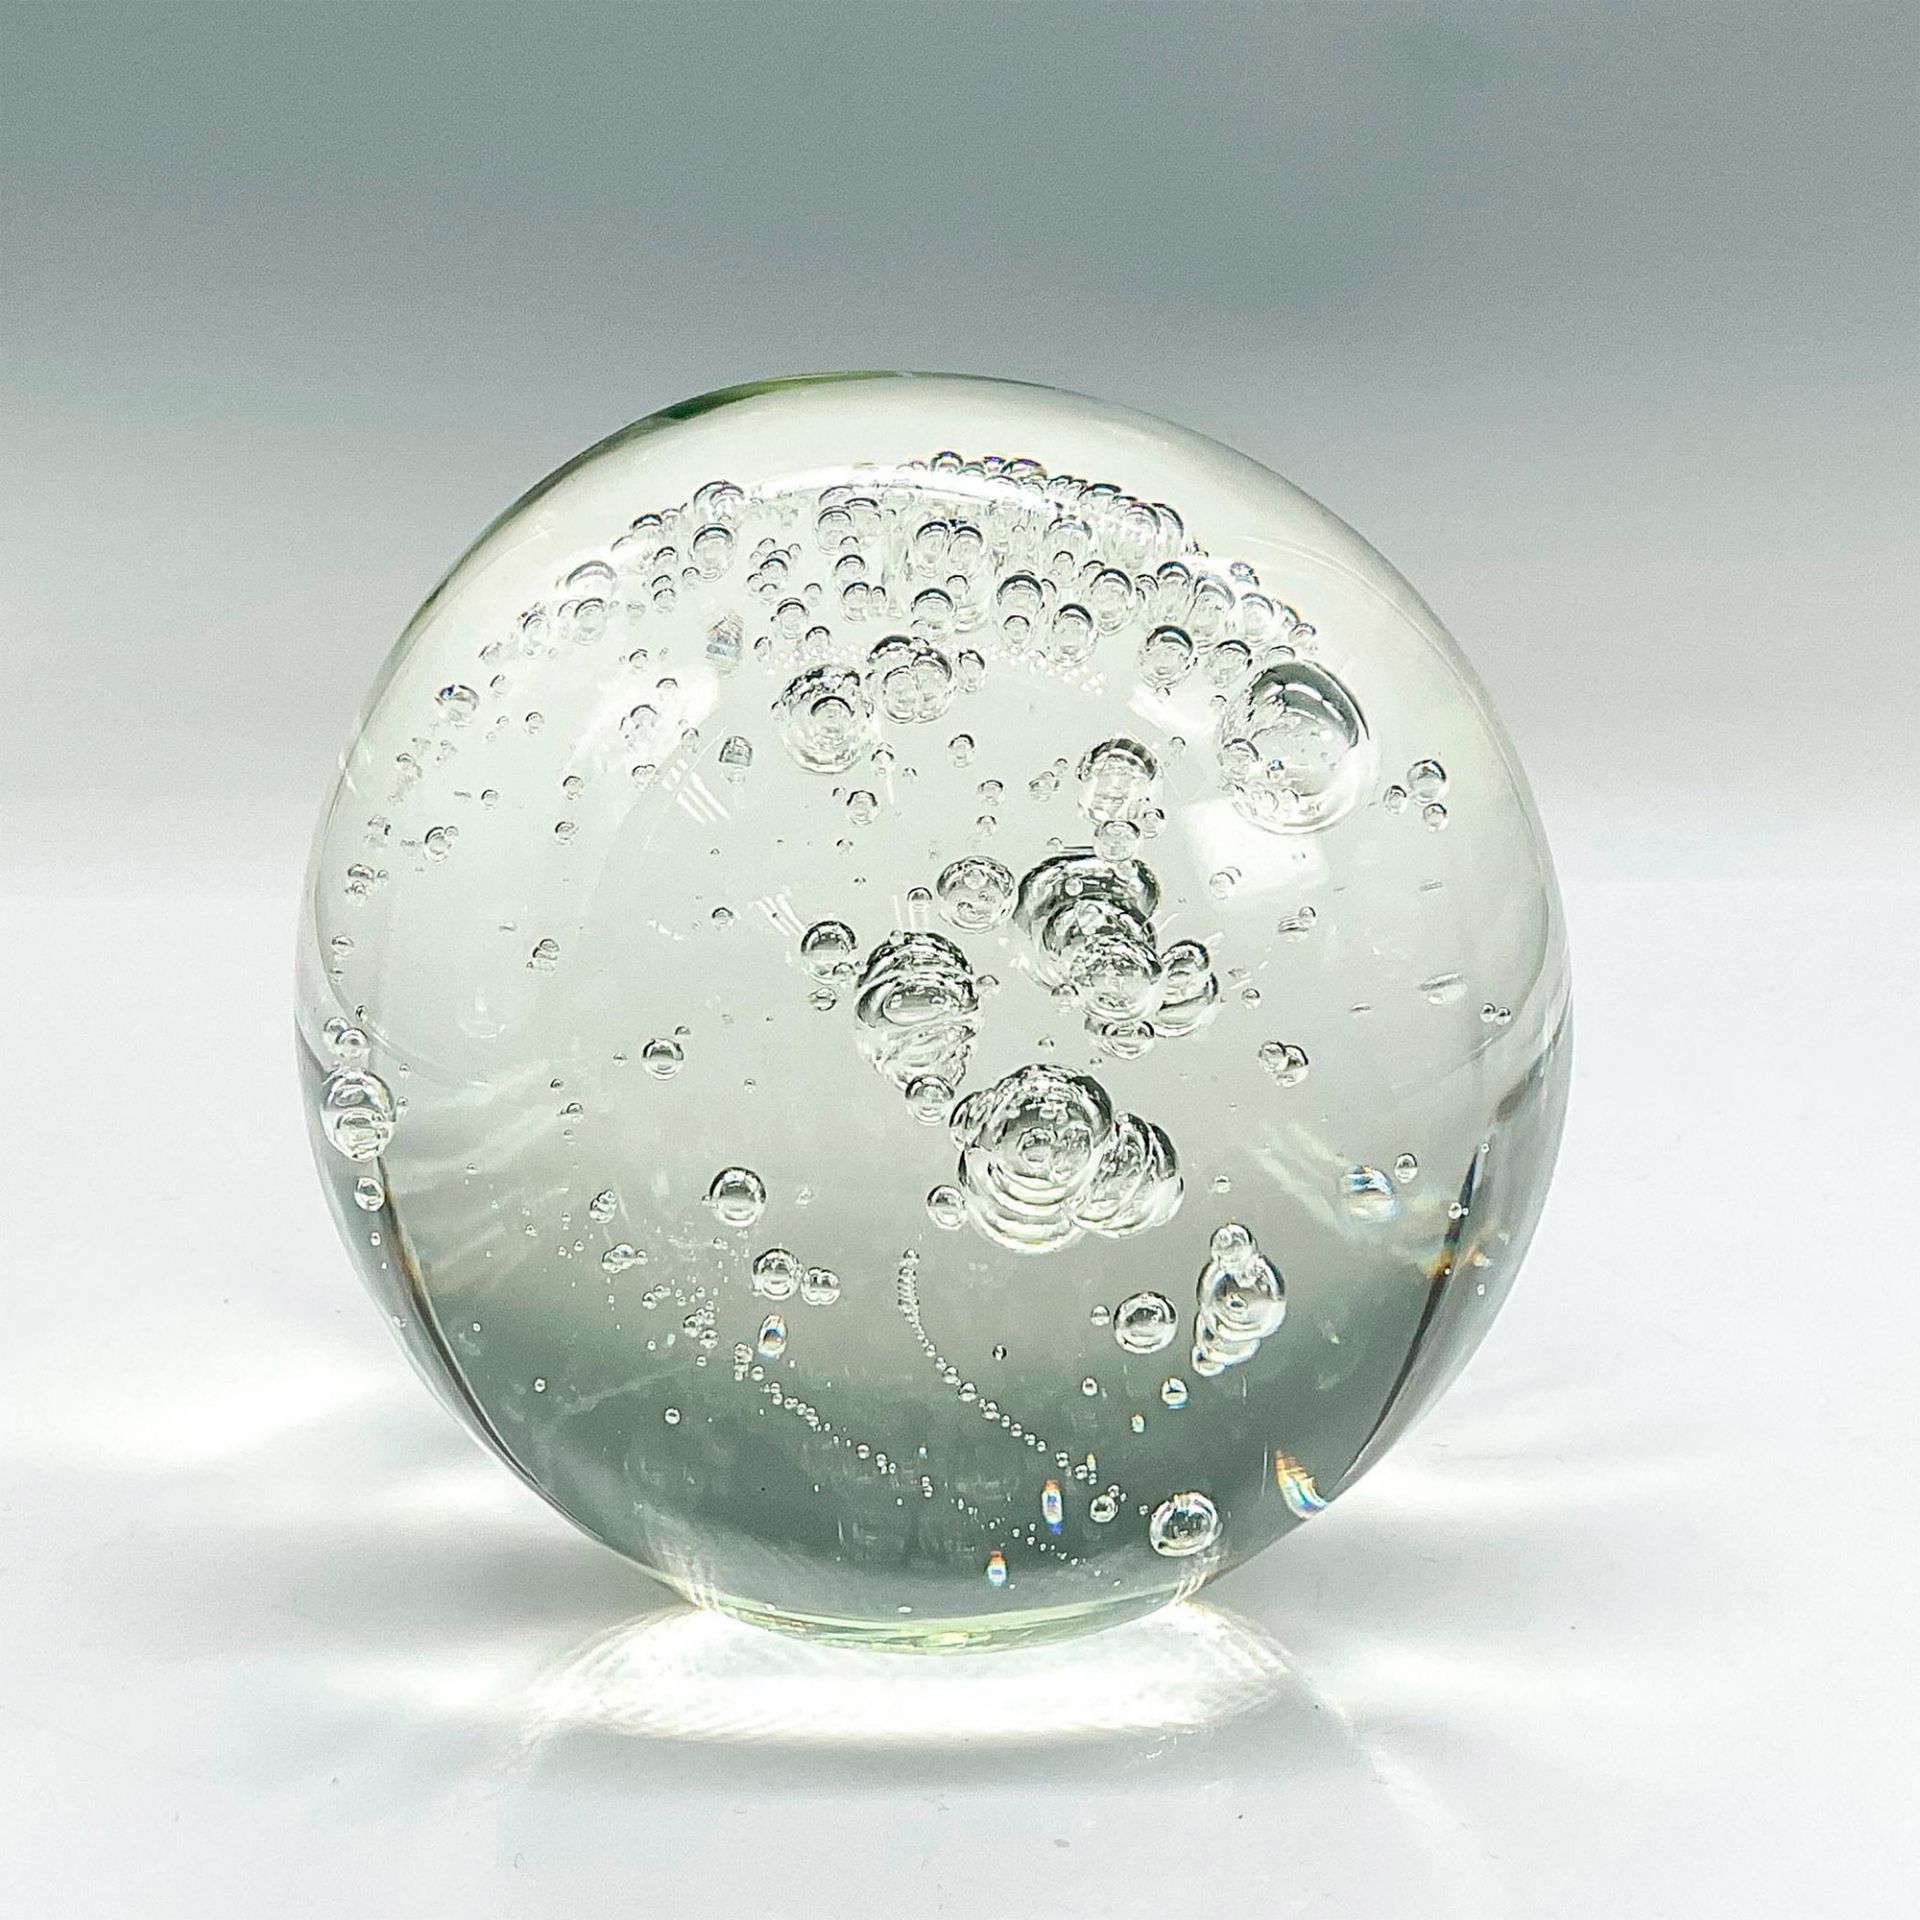 Glass Sphere Orb Paperweight With Bubbles - Image 2 of 3